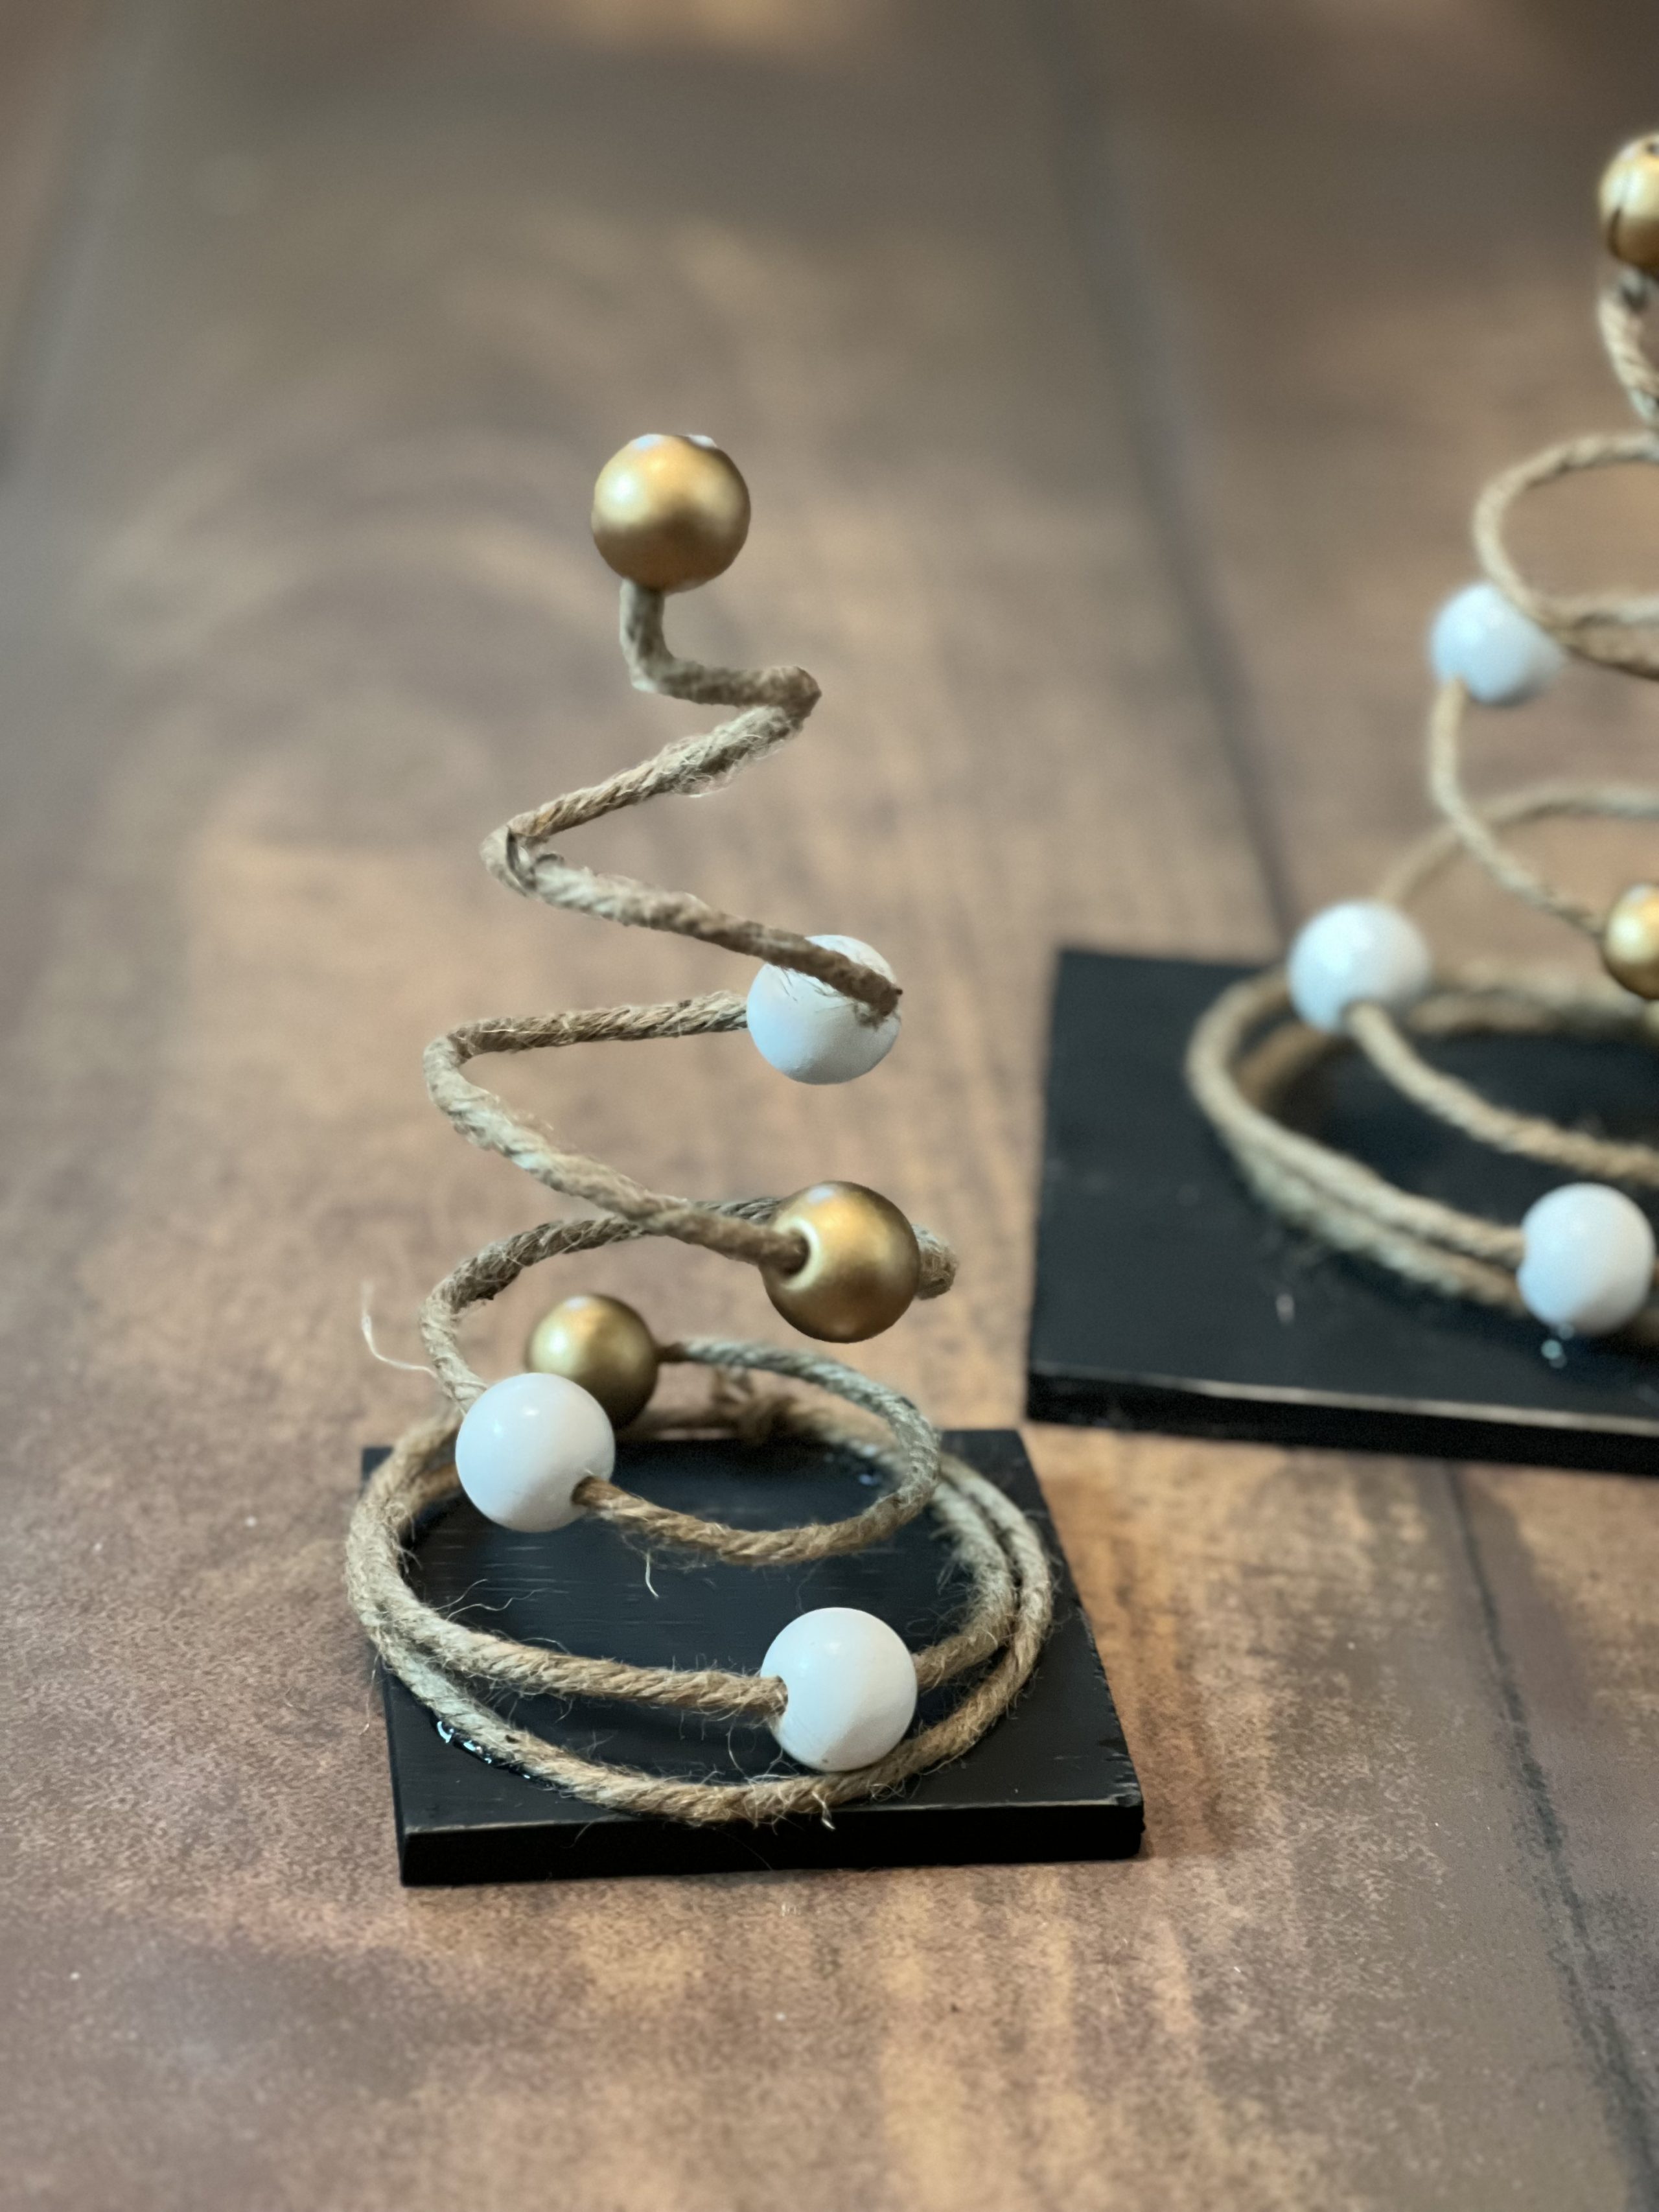 How to Make a Wire Christmas Tree